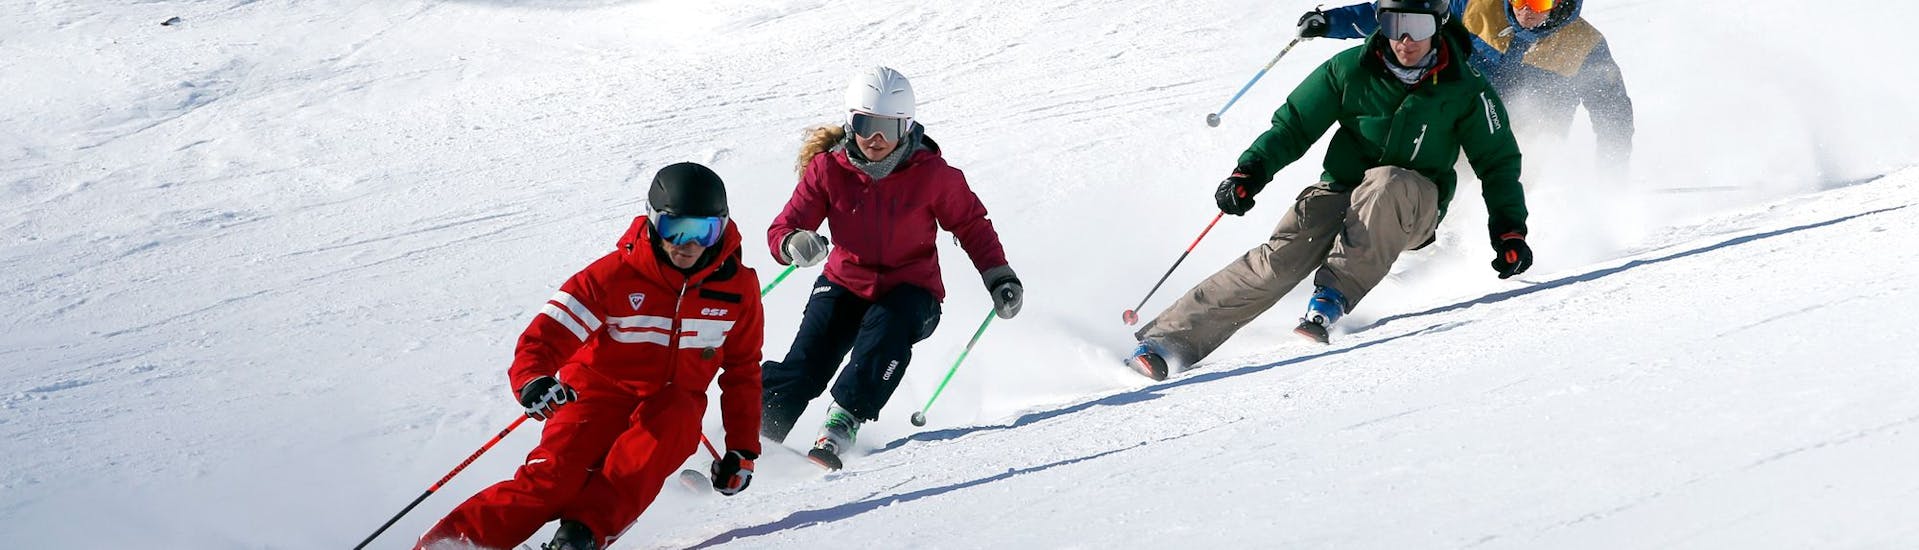 Skiers carving down the slopes with their Ski School ESF Valmorel instructor during teens and adults ski lessons. 